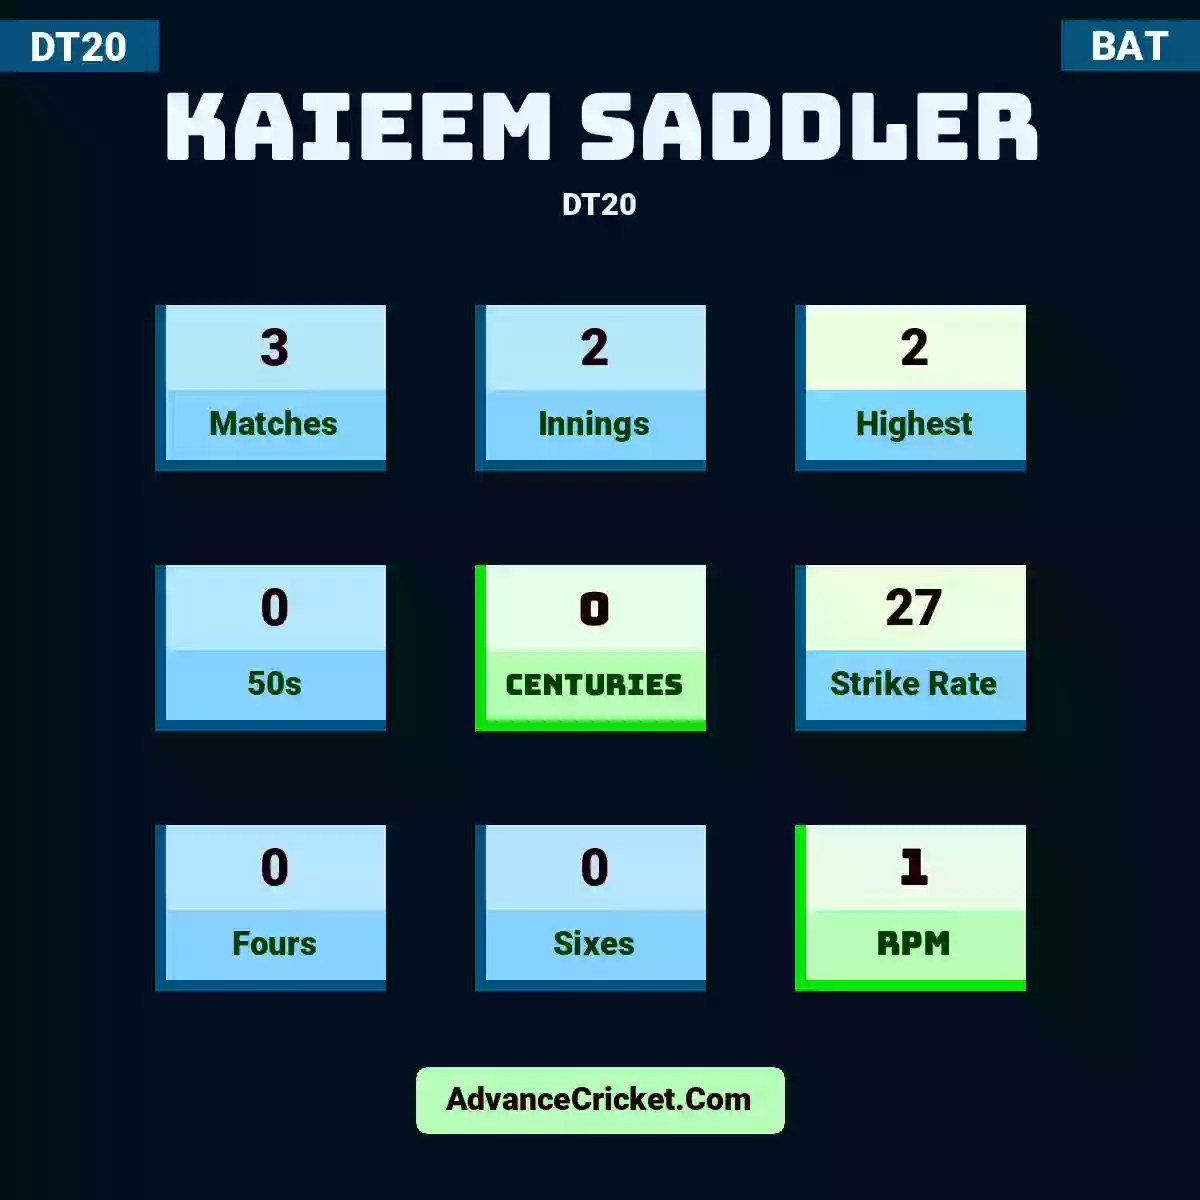 Kaieem Saddler DT20 , Kaieem Saddler played 3 matches, scored 2 runs as highest, 0 half-centuries, and 0 centuries, with a strike rate of 27. K.Saddler hit 0 fours and 0 sixes, with an RPM of 1.